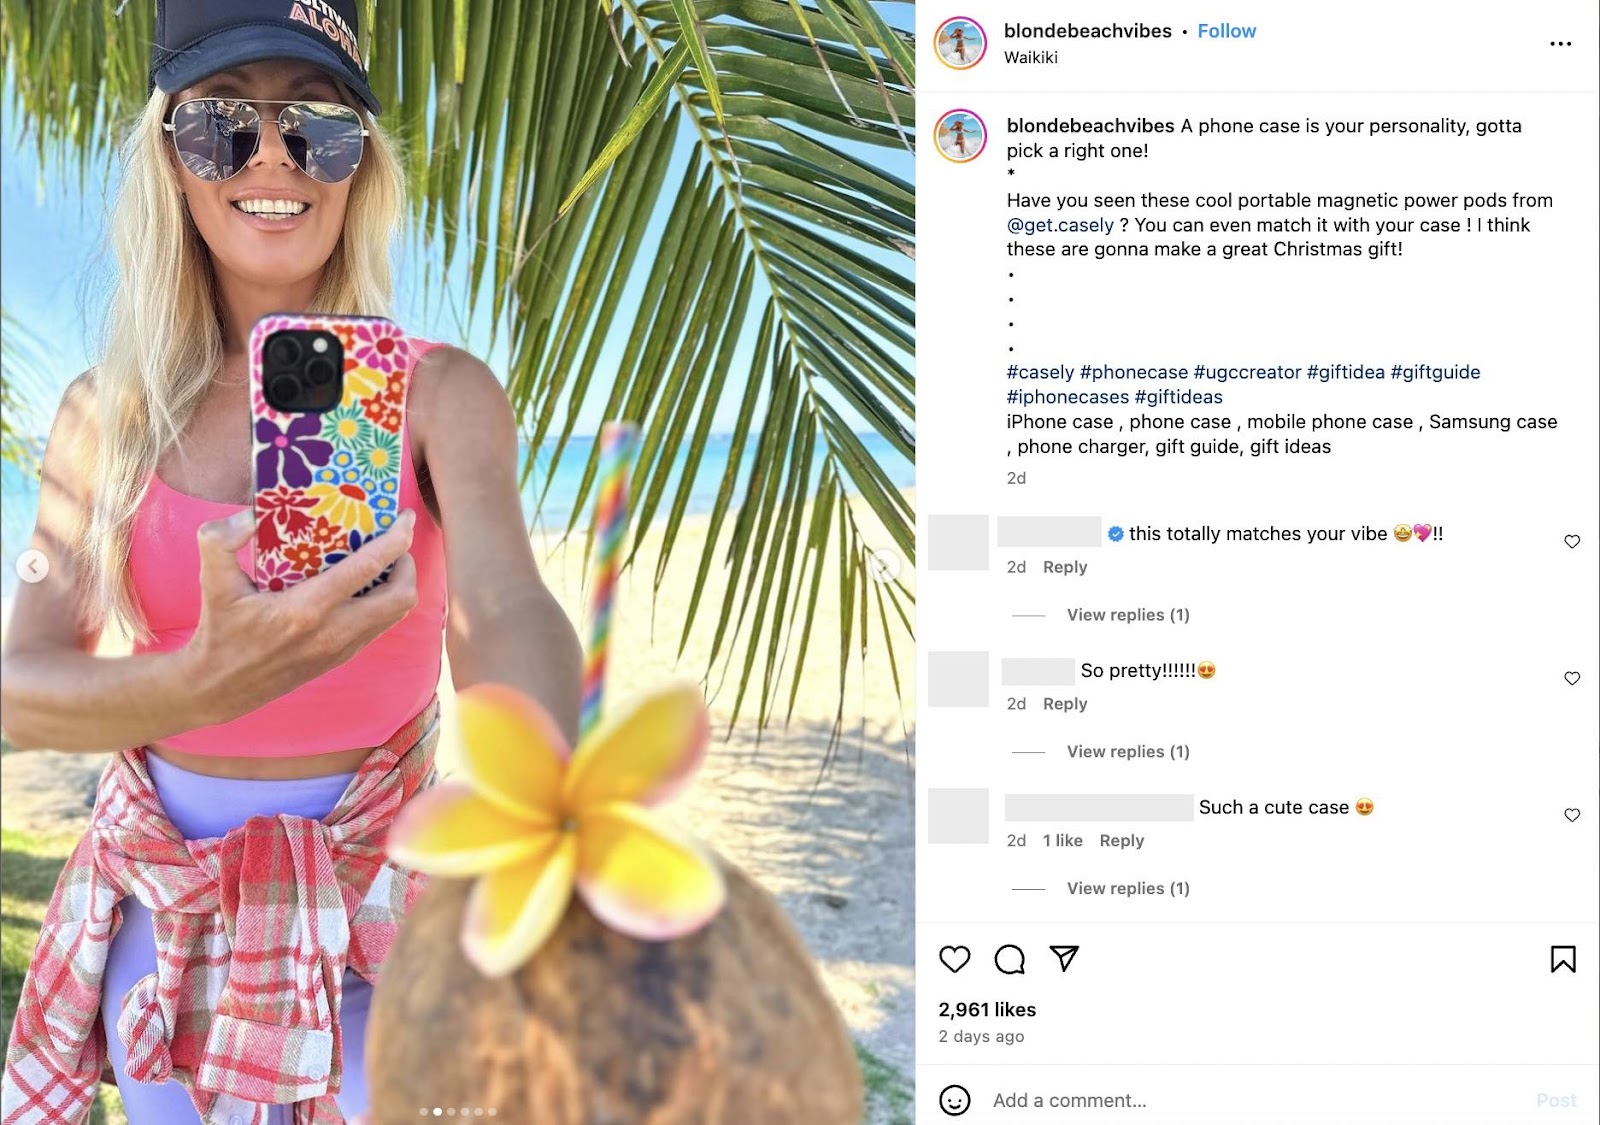 An Instagram post from @blondebeachvibes promoting phone cases from @get.casely